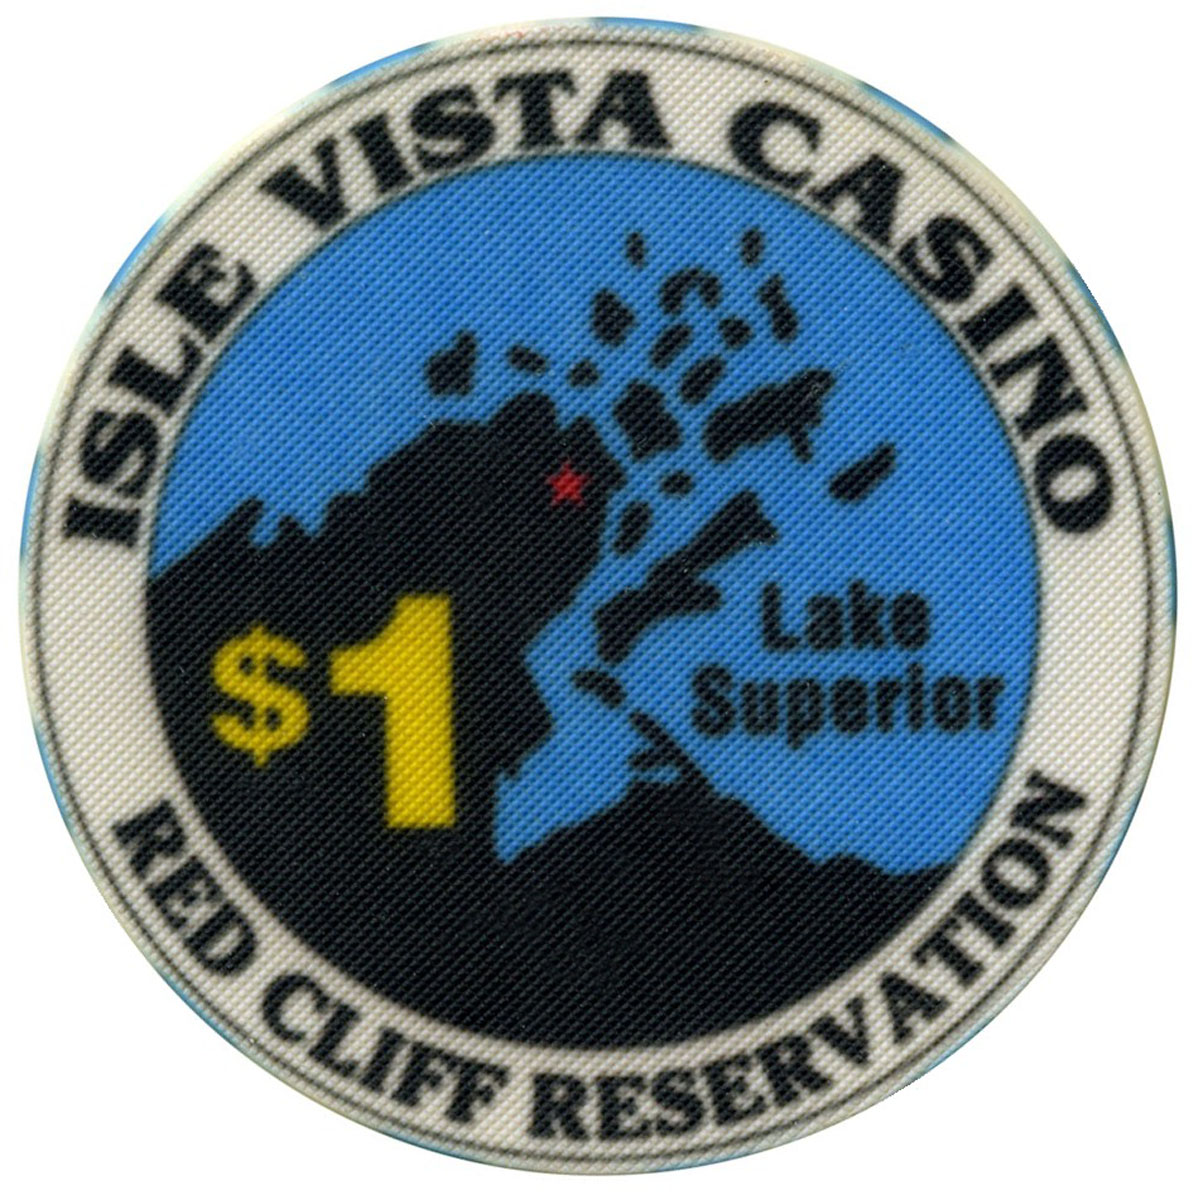 1.00 Chip from the Isle Vista Casino in Bayfield Wisconsin 